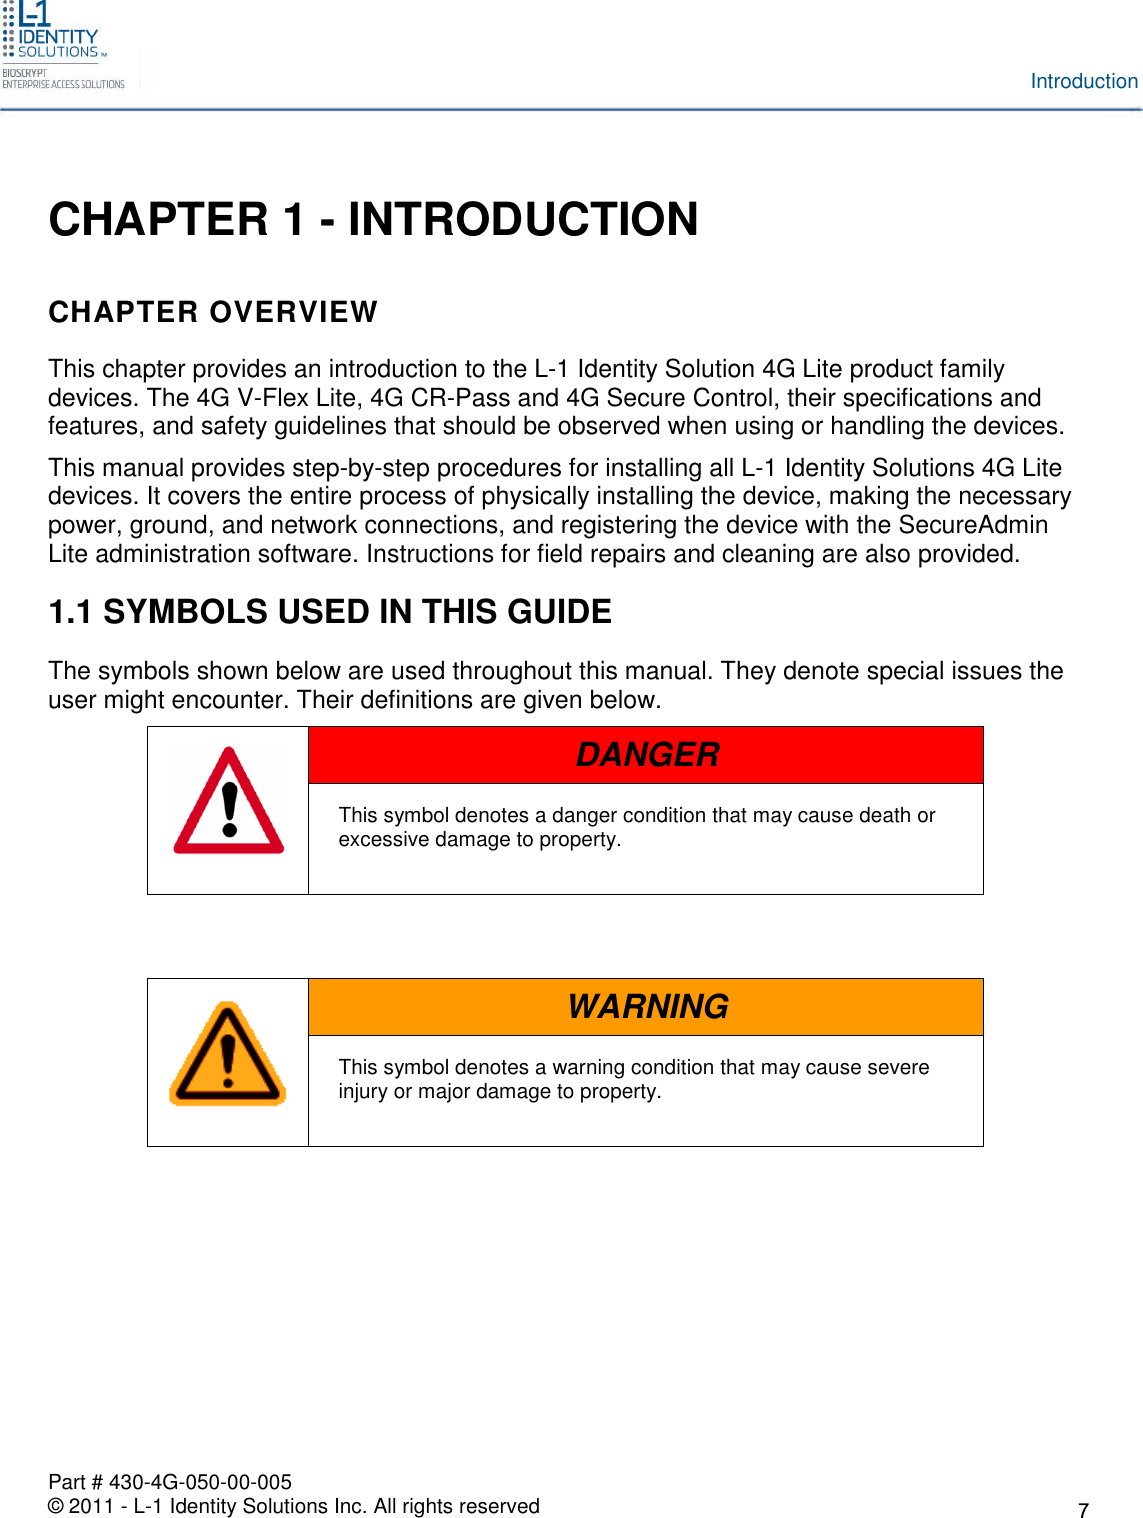 Part # 430-4G-050-00-005© 2011 - L-1 Identity Solutions Inc. All rights reservedIntroductionCHAPTER 1 - INTRODUCTIONCHAPTER OVERVIEWThis chapter provides an introduction to the L-1 Identity Solution 4G Lite product familydevices. The 4G V-Flex Lite, 4G CR-Pass and 4G Secure Control, their specifications andfeatures, and safety guidelines that should be observed when using or handling the devices.This manual provides step-by-step procedures for installing all L-1 Identity Solutions 4G Litedevices. It covers the entire process of physically installing the device, making the necessarypower, ground, and network connections, and registering the device with the SecureAdminLite administration software. Instructions for field repairs and cleaning are also provided.1.1 SYMBOLS USED IN THIS GUIDEThe symbols shown below are used throughout this manual. They denote special issues theuser might encounter. Their definitions are given below.DANGERThis symbol denotes a danger condition that may cause death orexcessive damage to property.WARNINGThis symbol denotes a warning condition that may cause severeinjury or major damage to property.